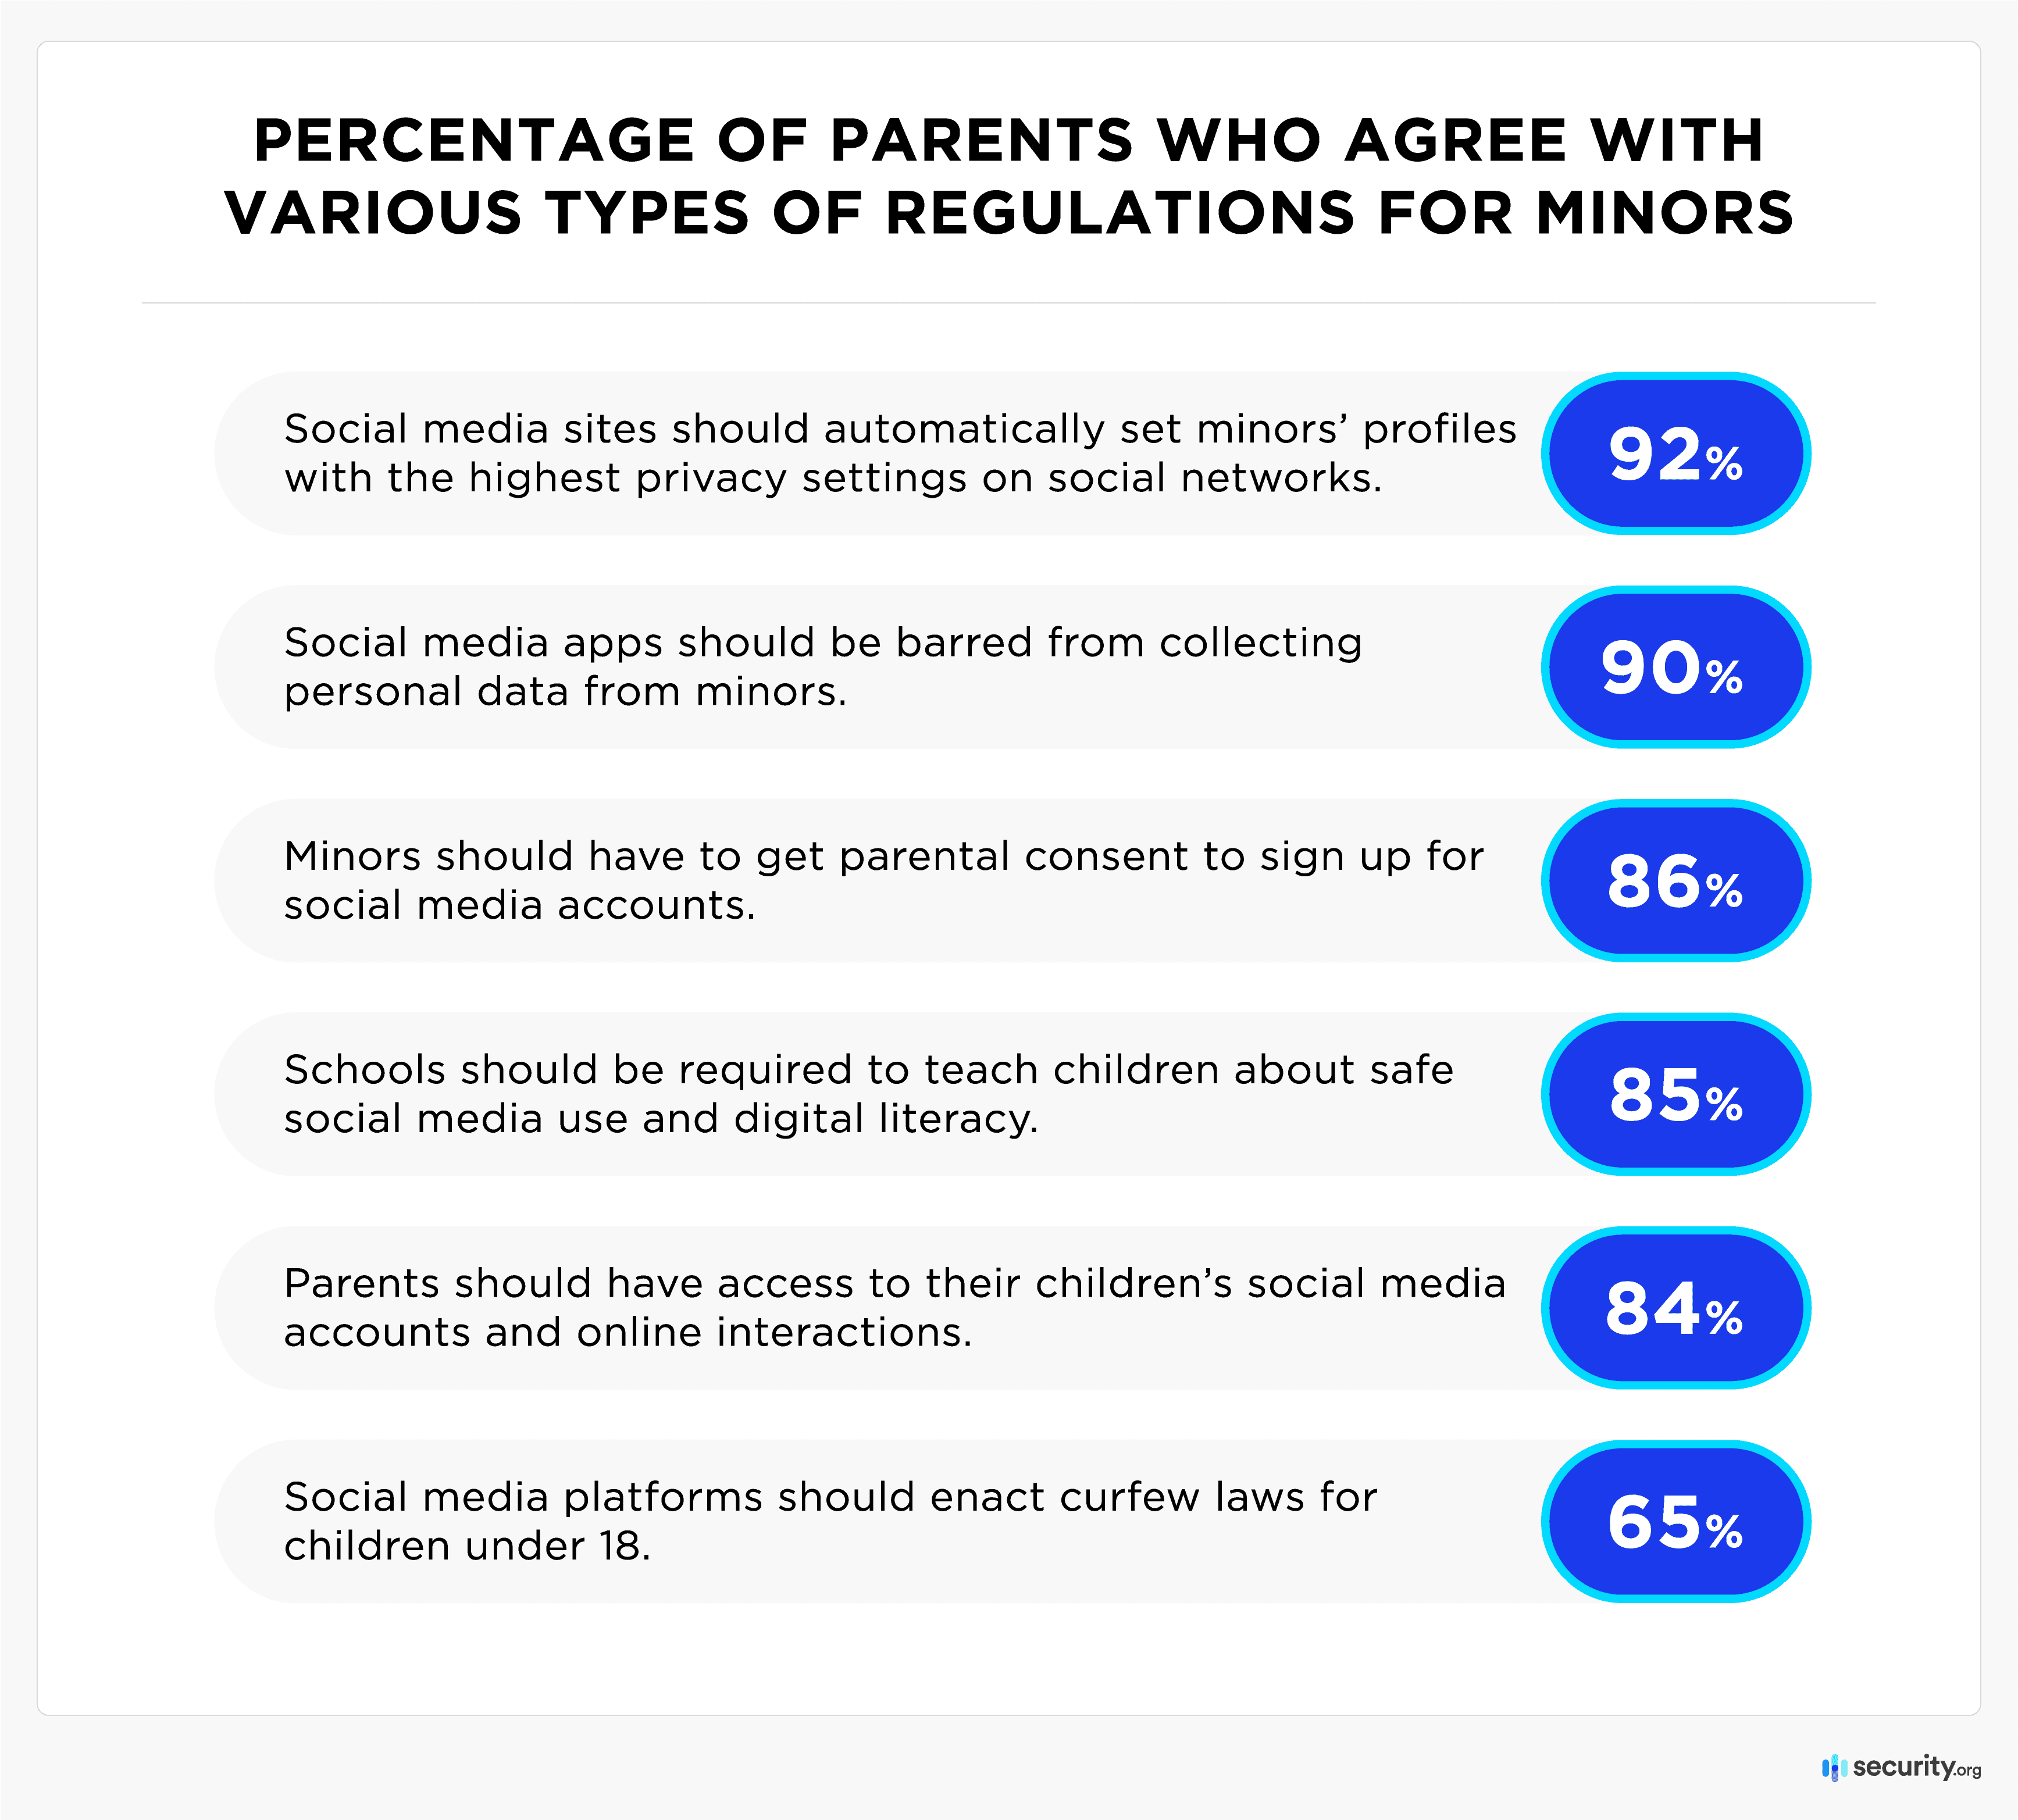 Percentage of parents who agree with various types of regulations for minors